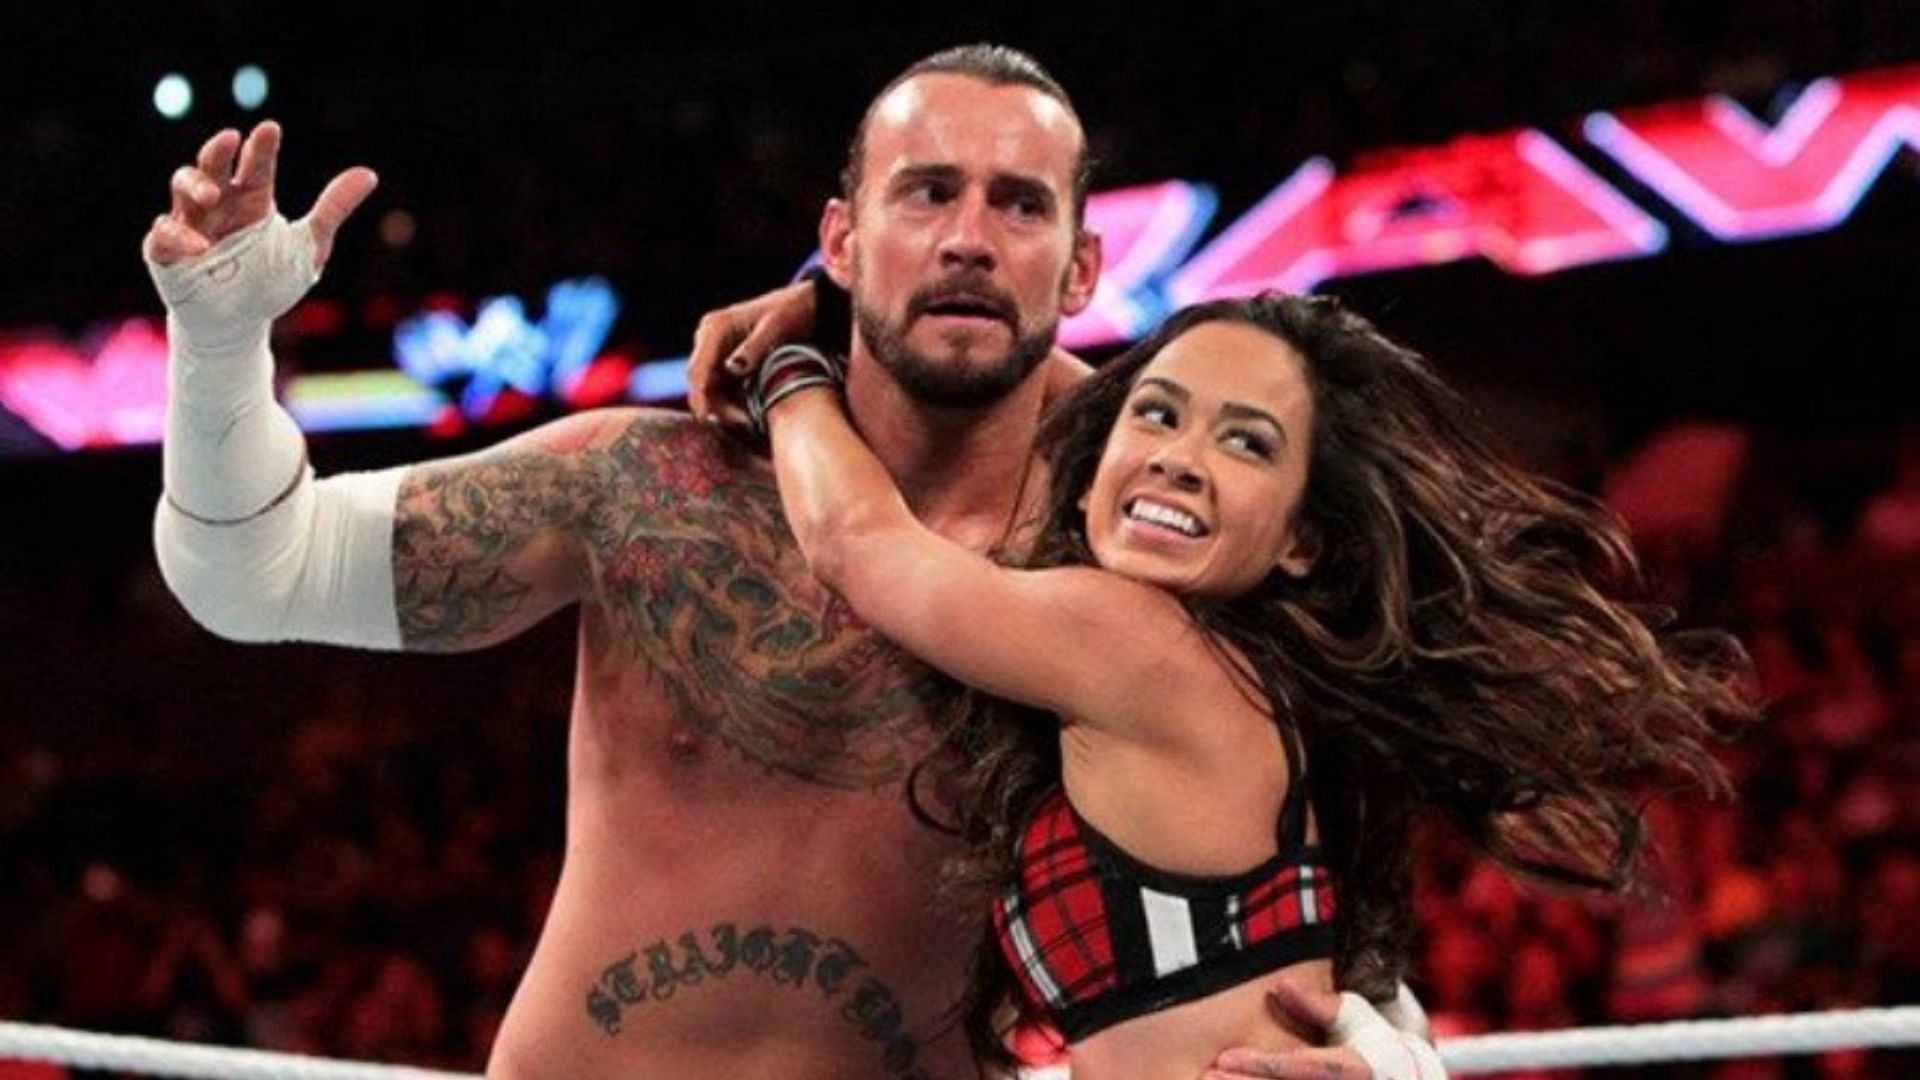 CM Punk and AJ Lee at a WWE event in 2012